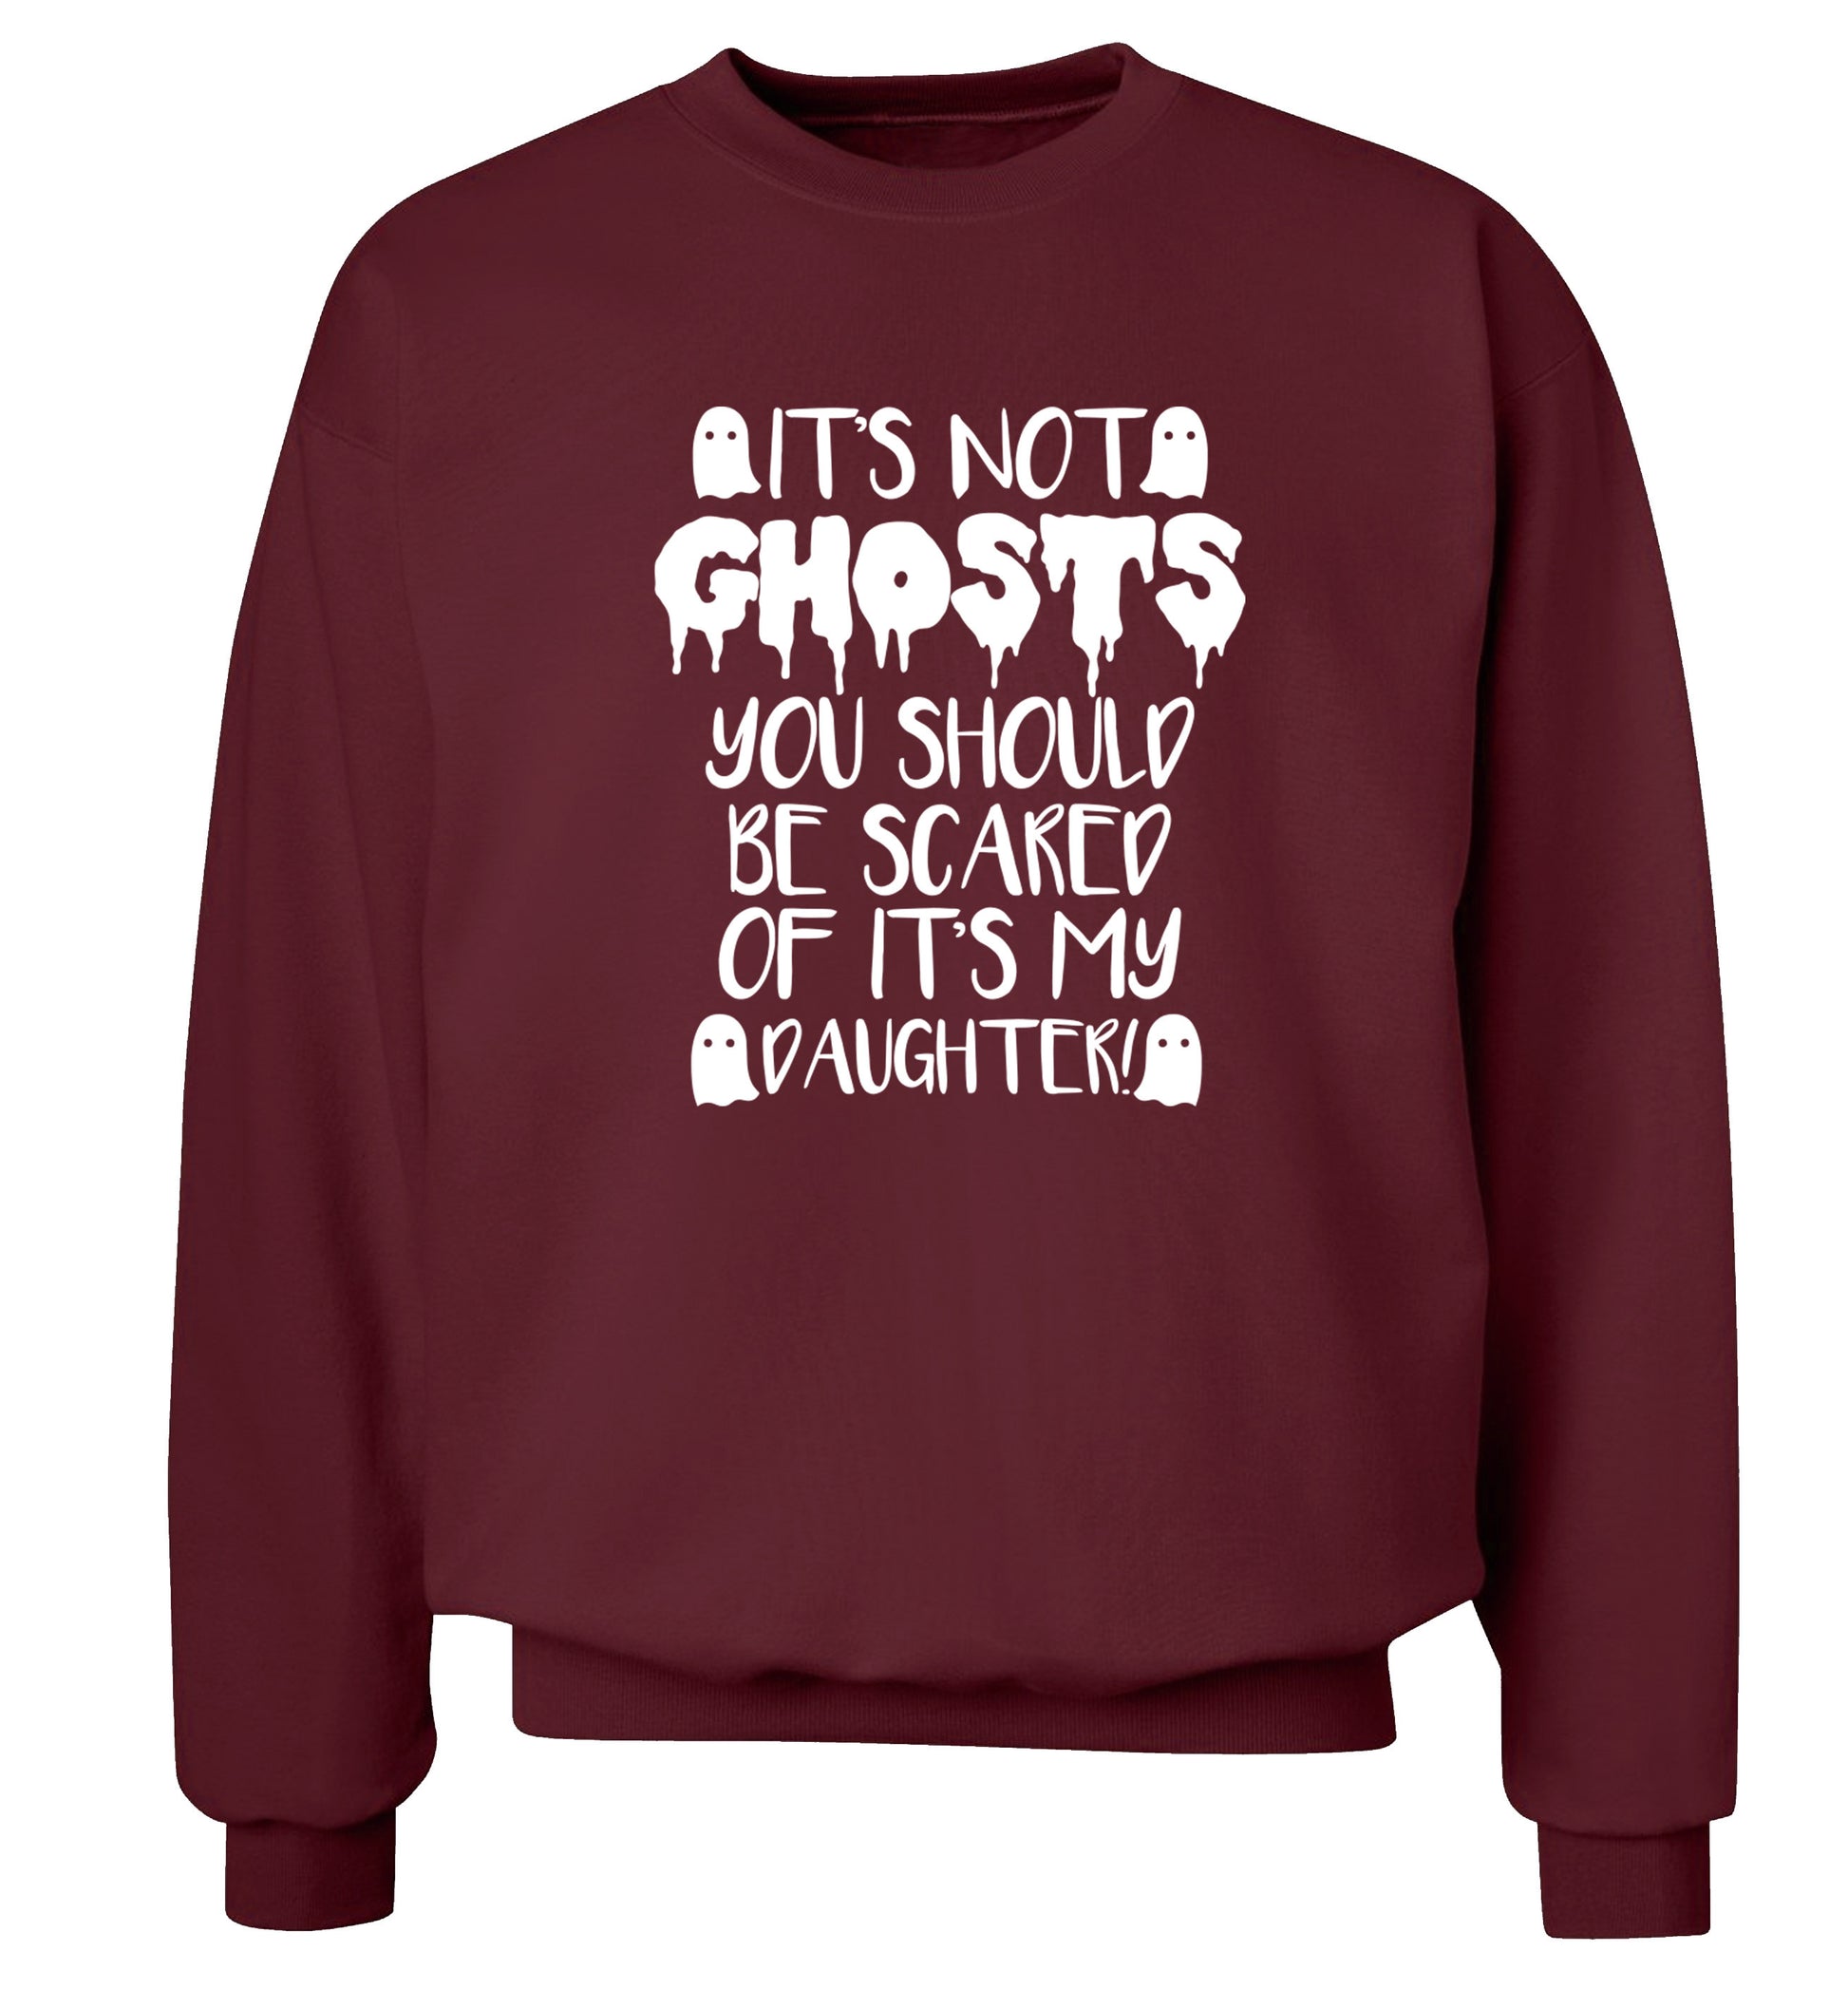 It's not ghosts you should be scared of it's my daughter! Adult's unisex maroon Sweater 2XL